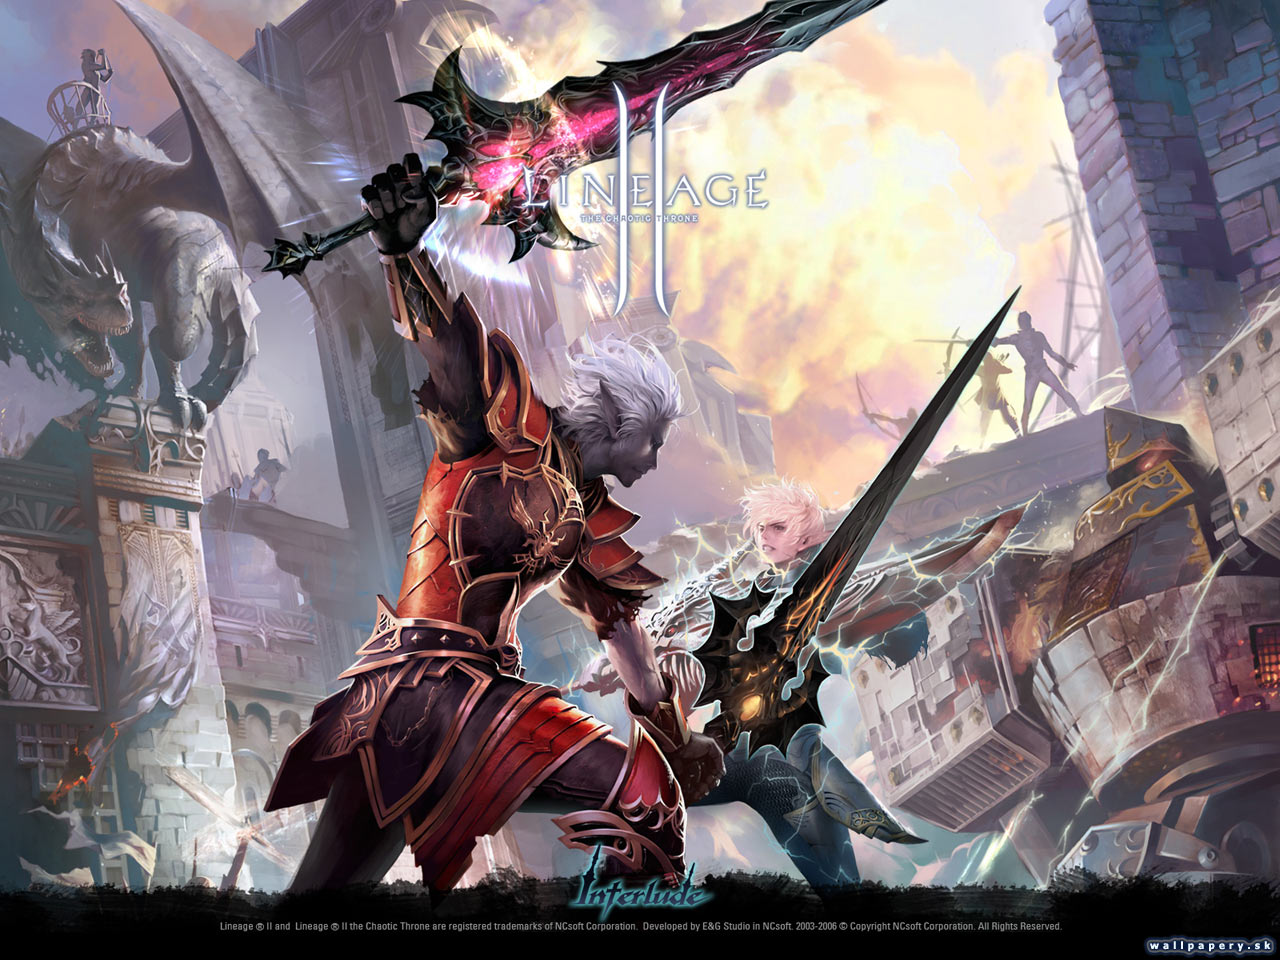 Download full size Lineage 2 The Chaotic Throne wallpaper / Games / 1280x960